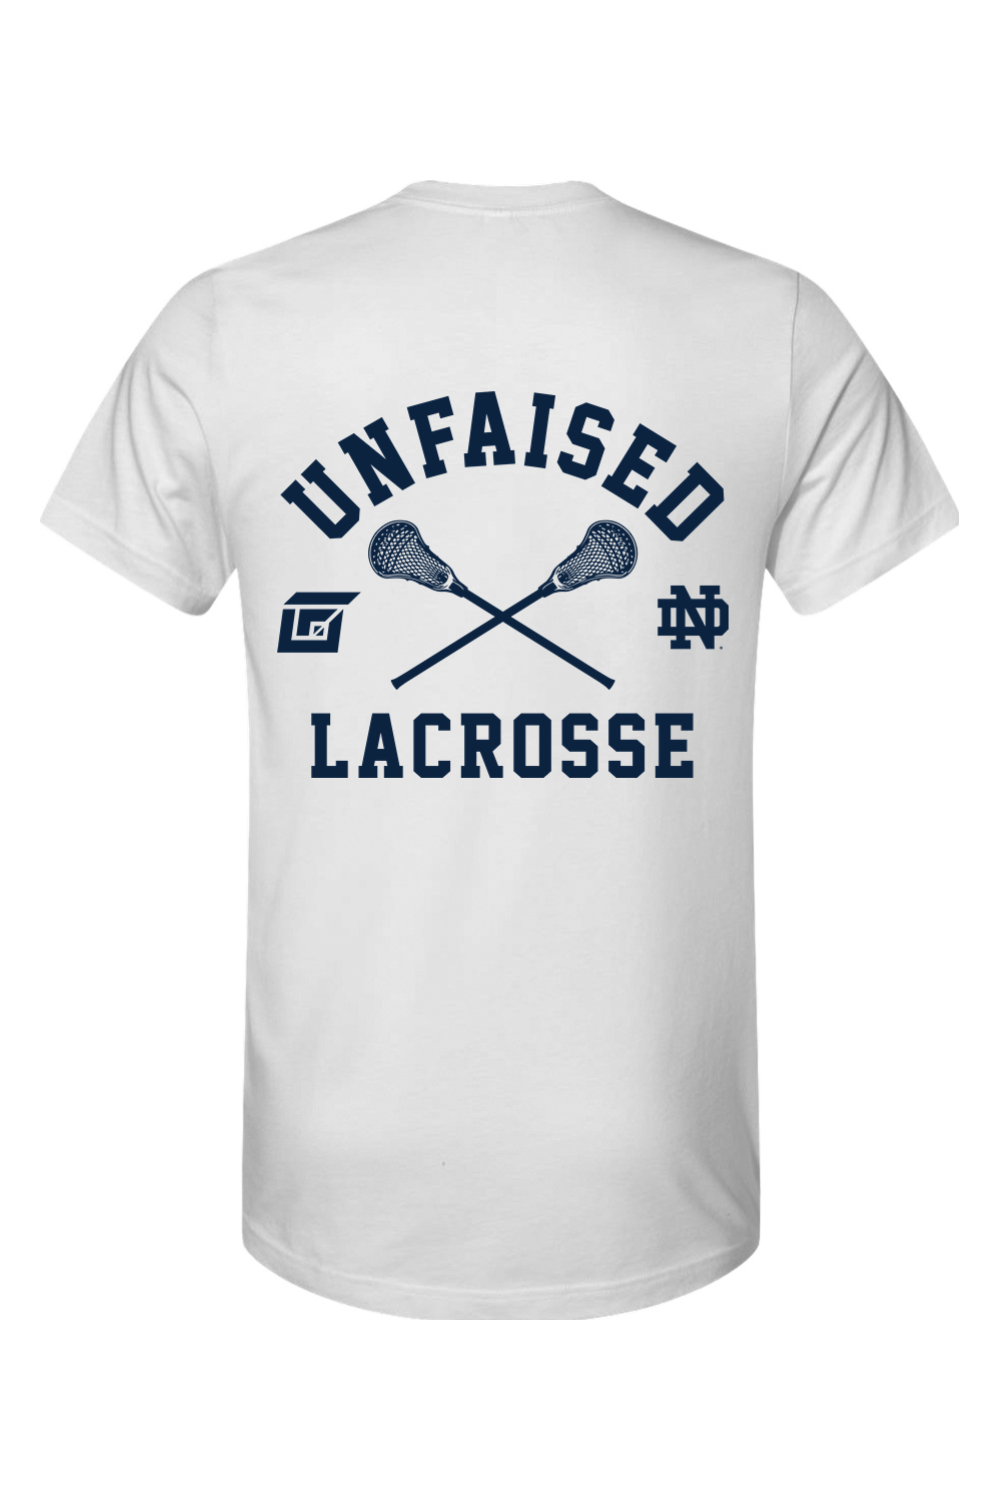 Unfaised White T-Shirt Sports Shersey - Lacrosse